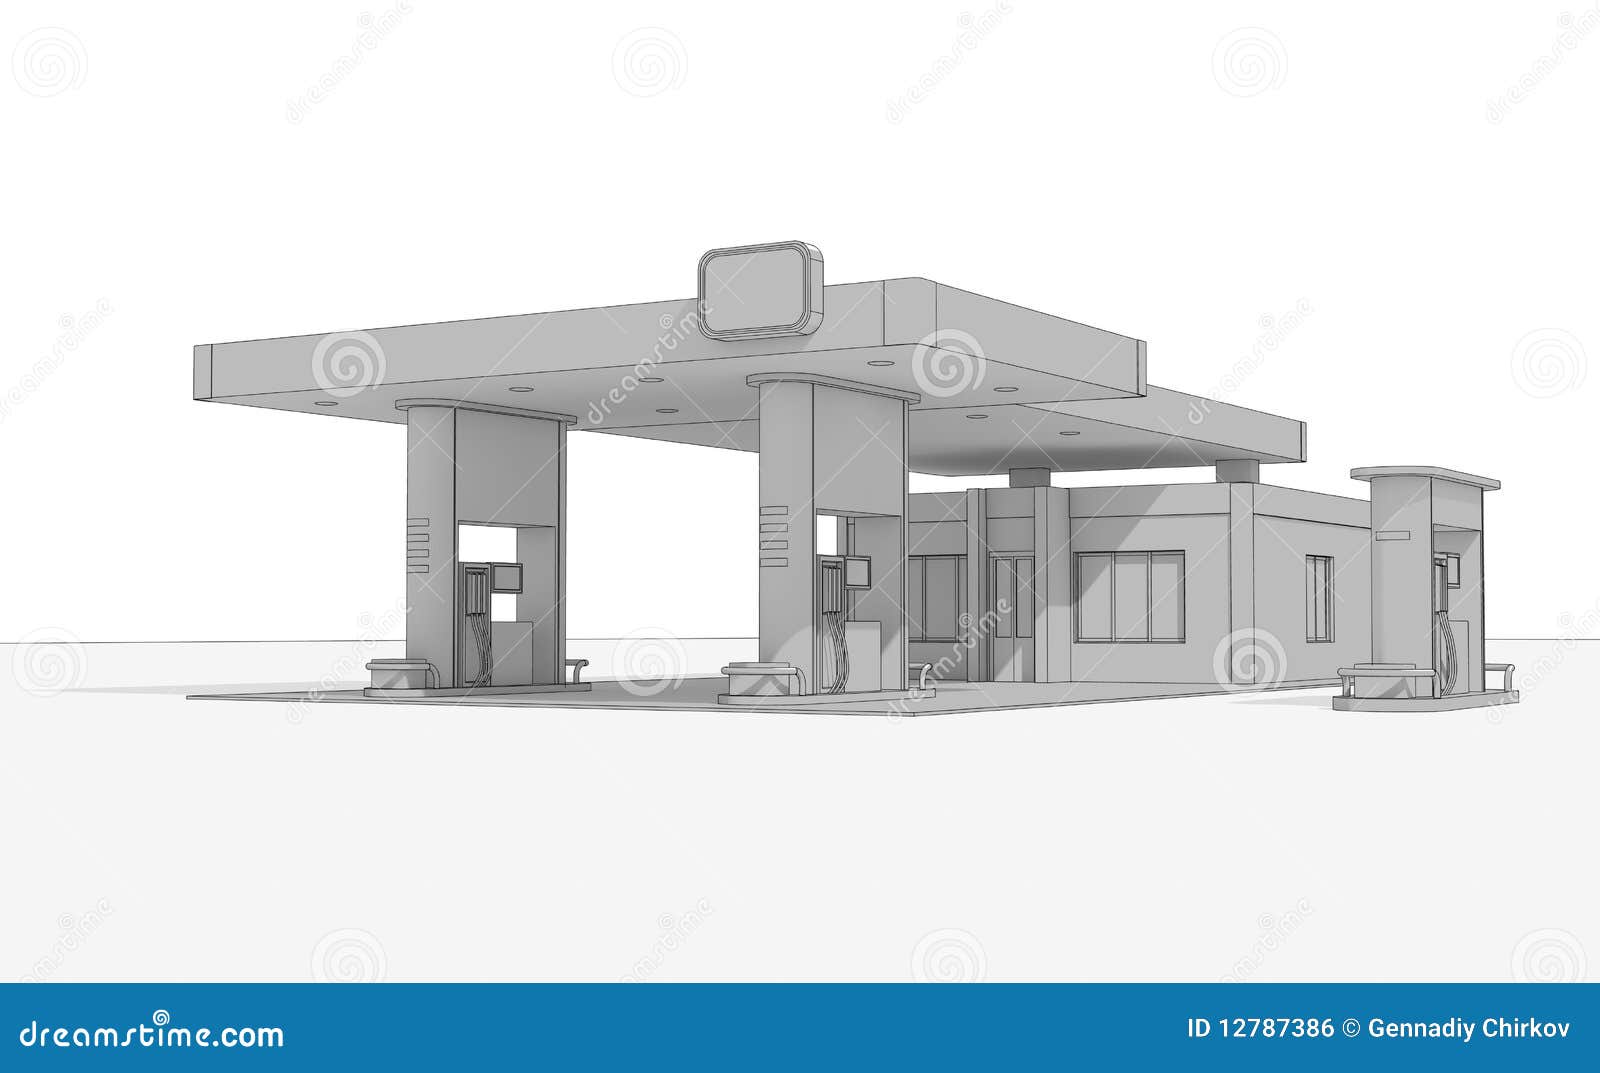 Petrol station. Vector drawing - Stock Image - Everypixel